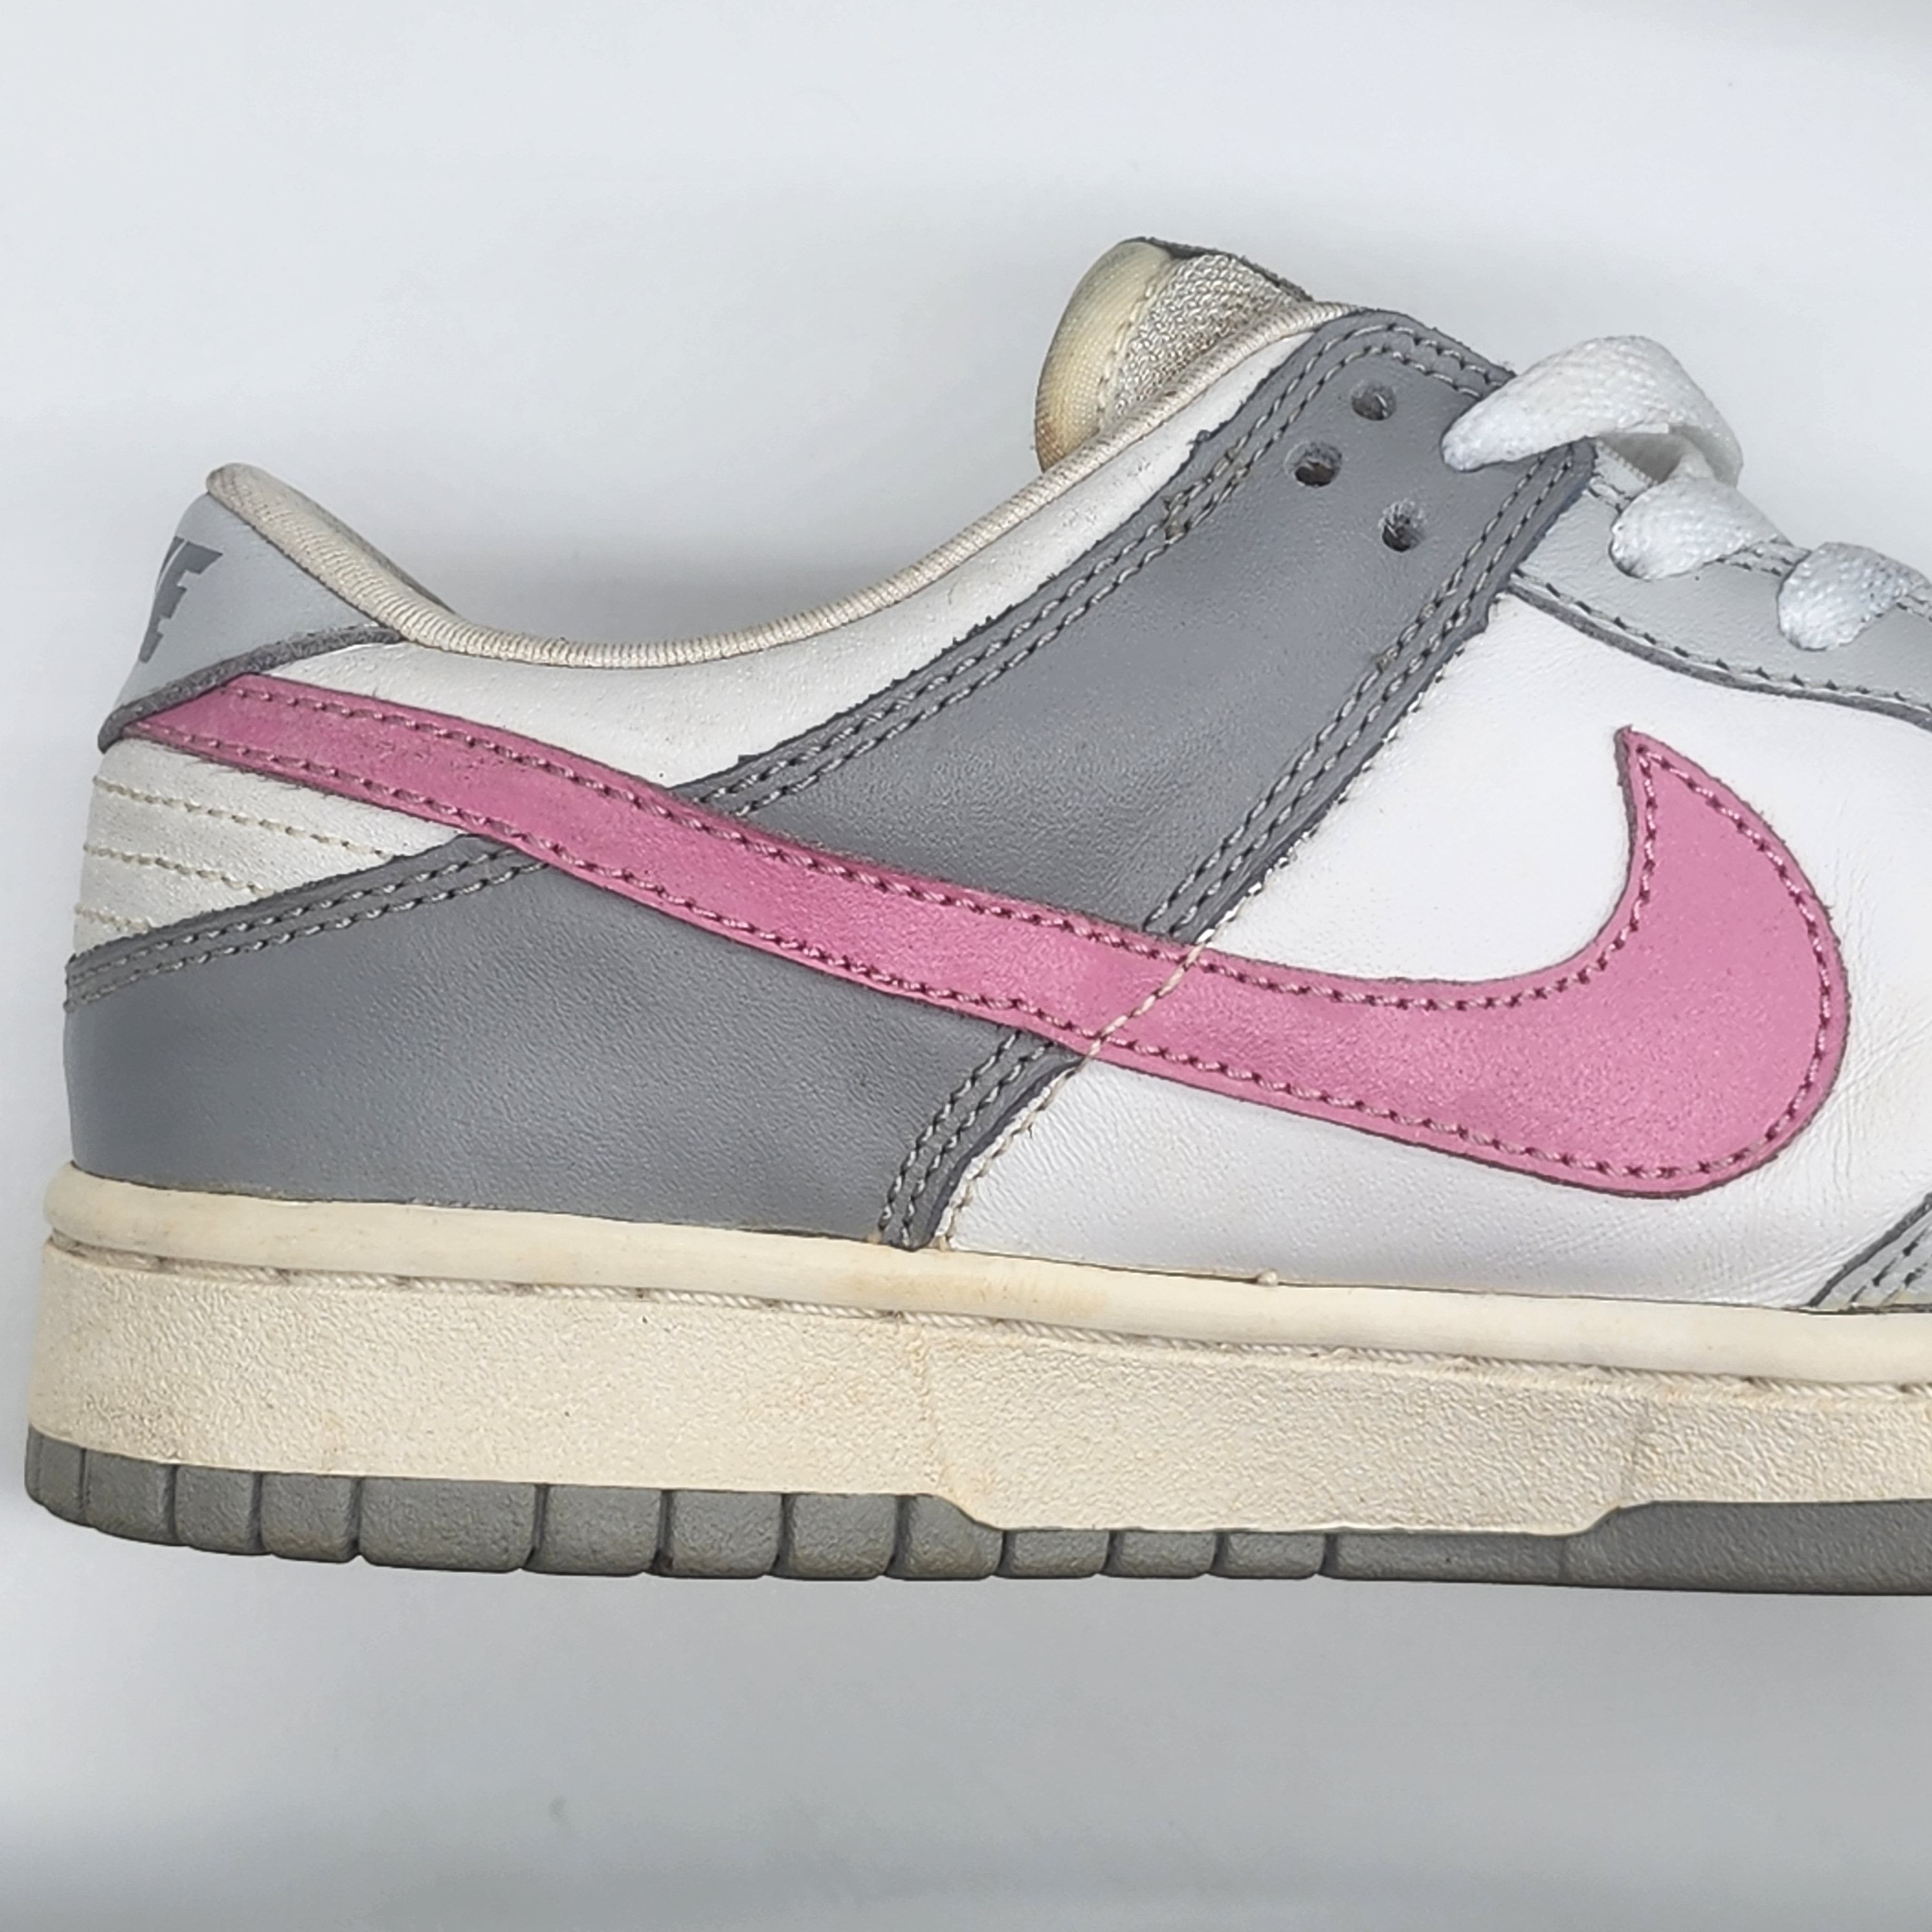 Nike - 2004 W's Dunk Low Pro Pink Neutral Gray - 11